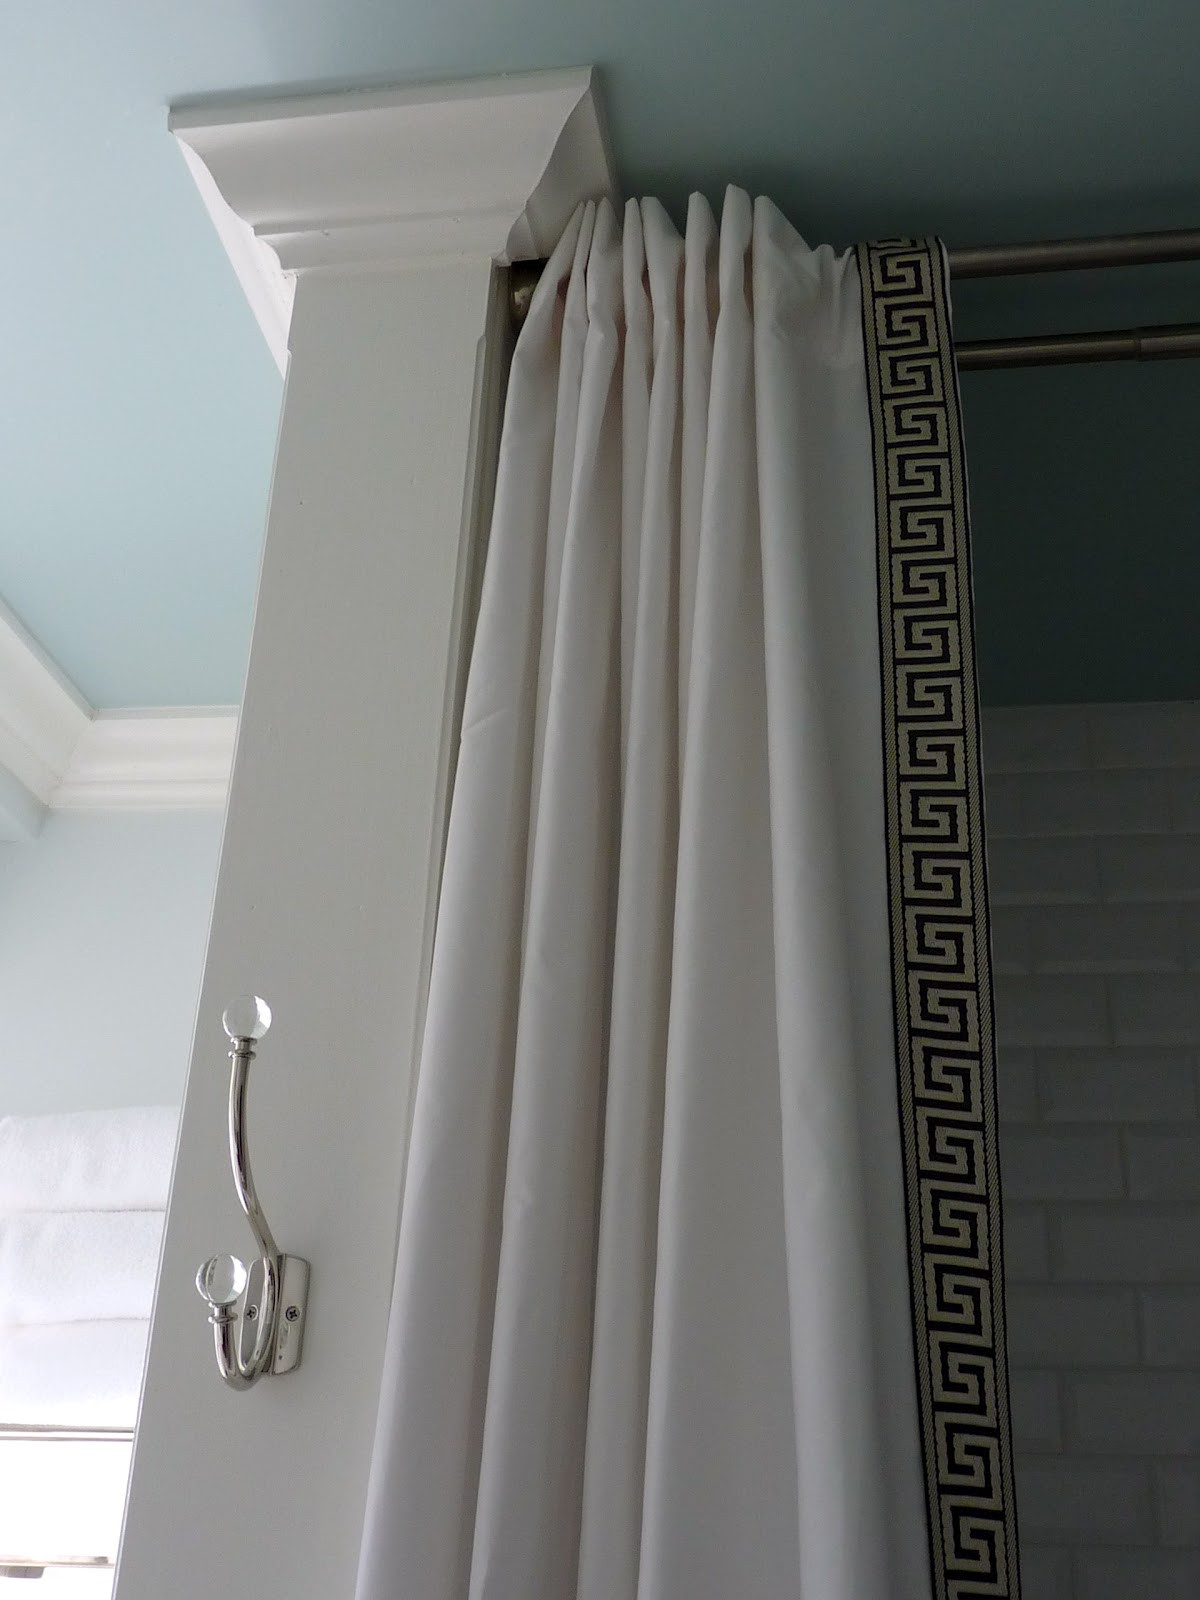 Bathroom Shower Curtain Rods
 Ceiling Mounted Shower Curtain – HomesFeed